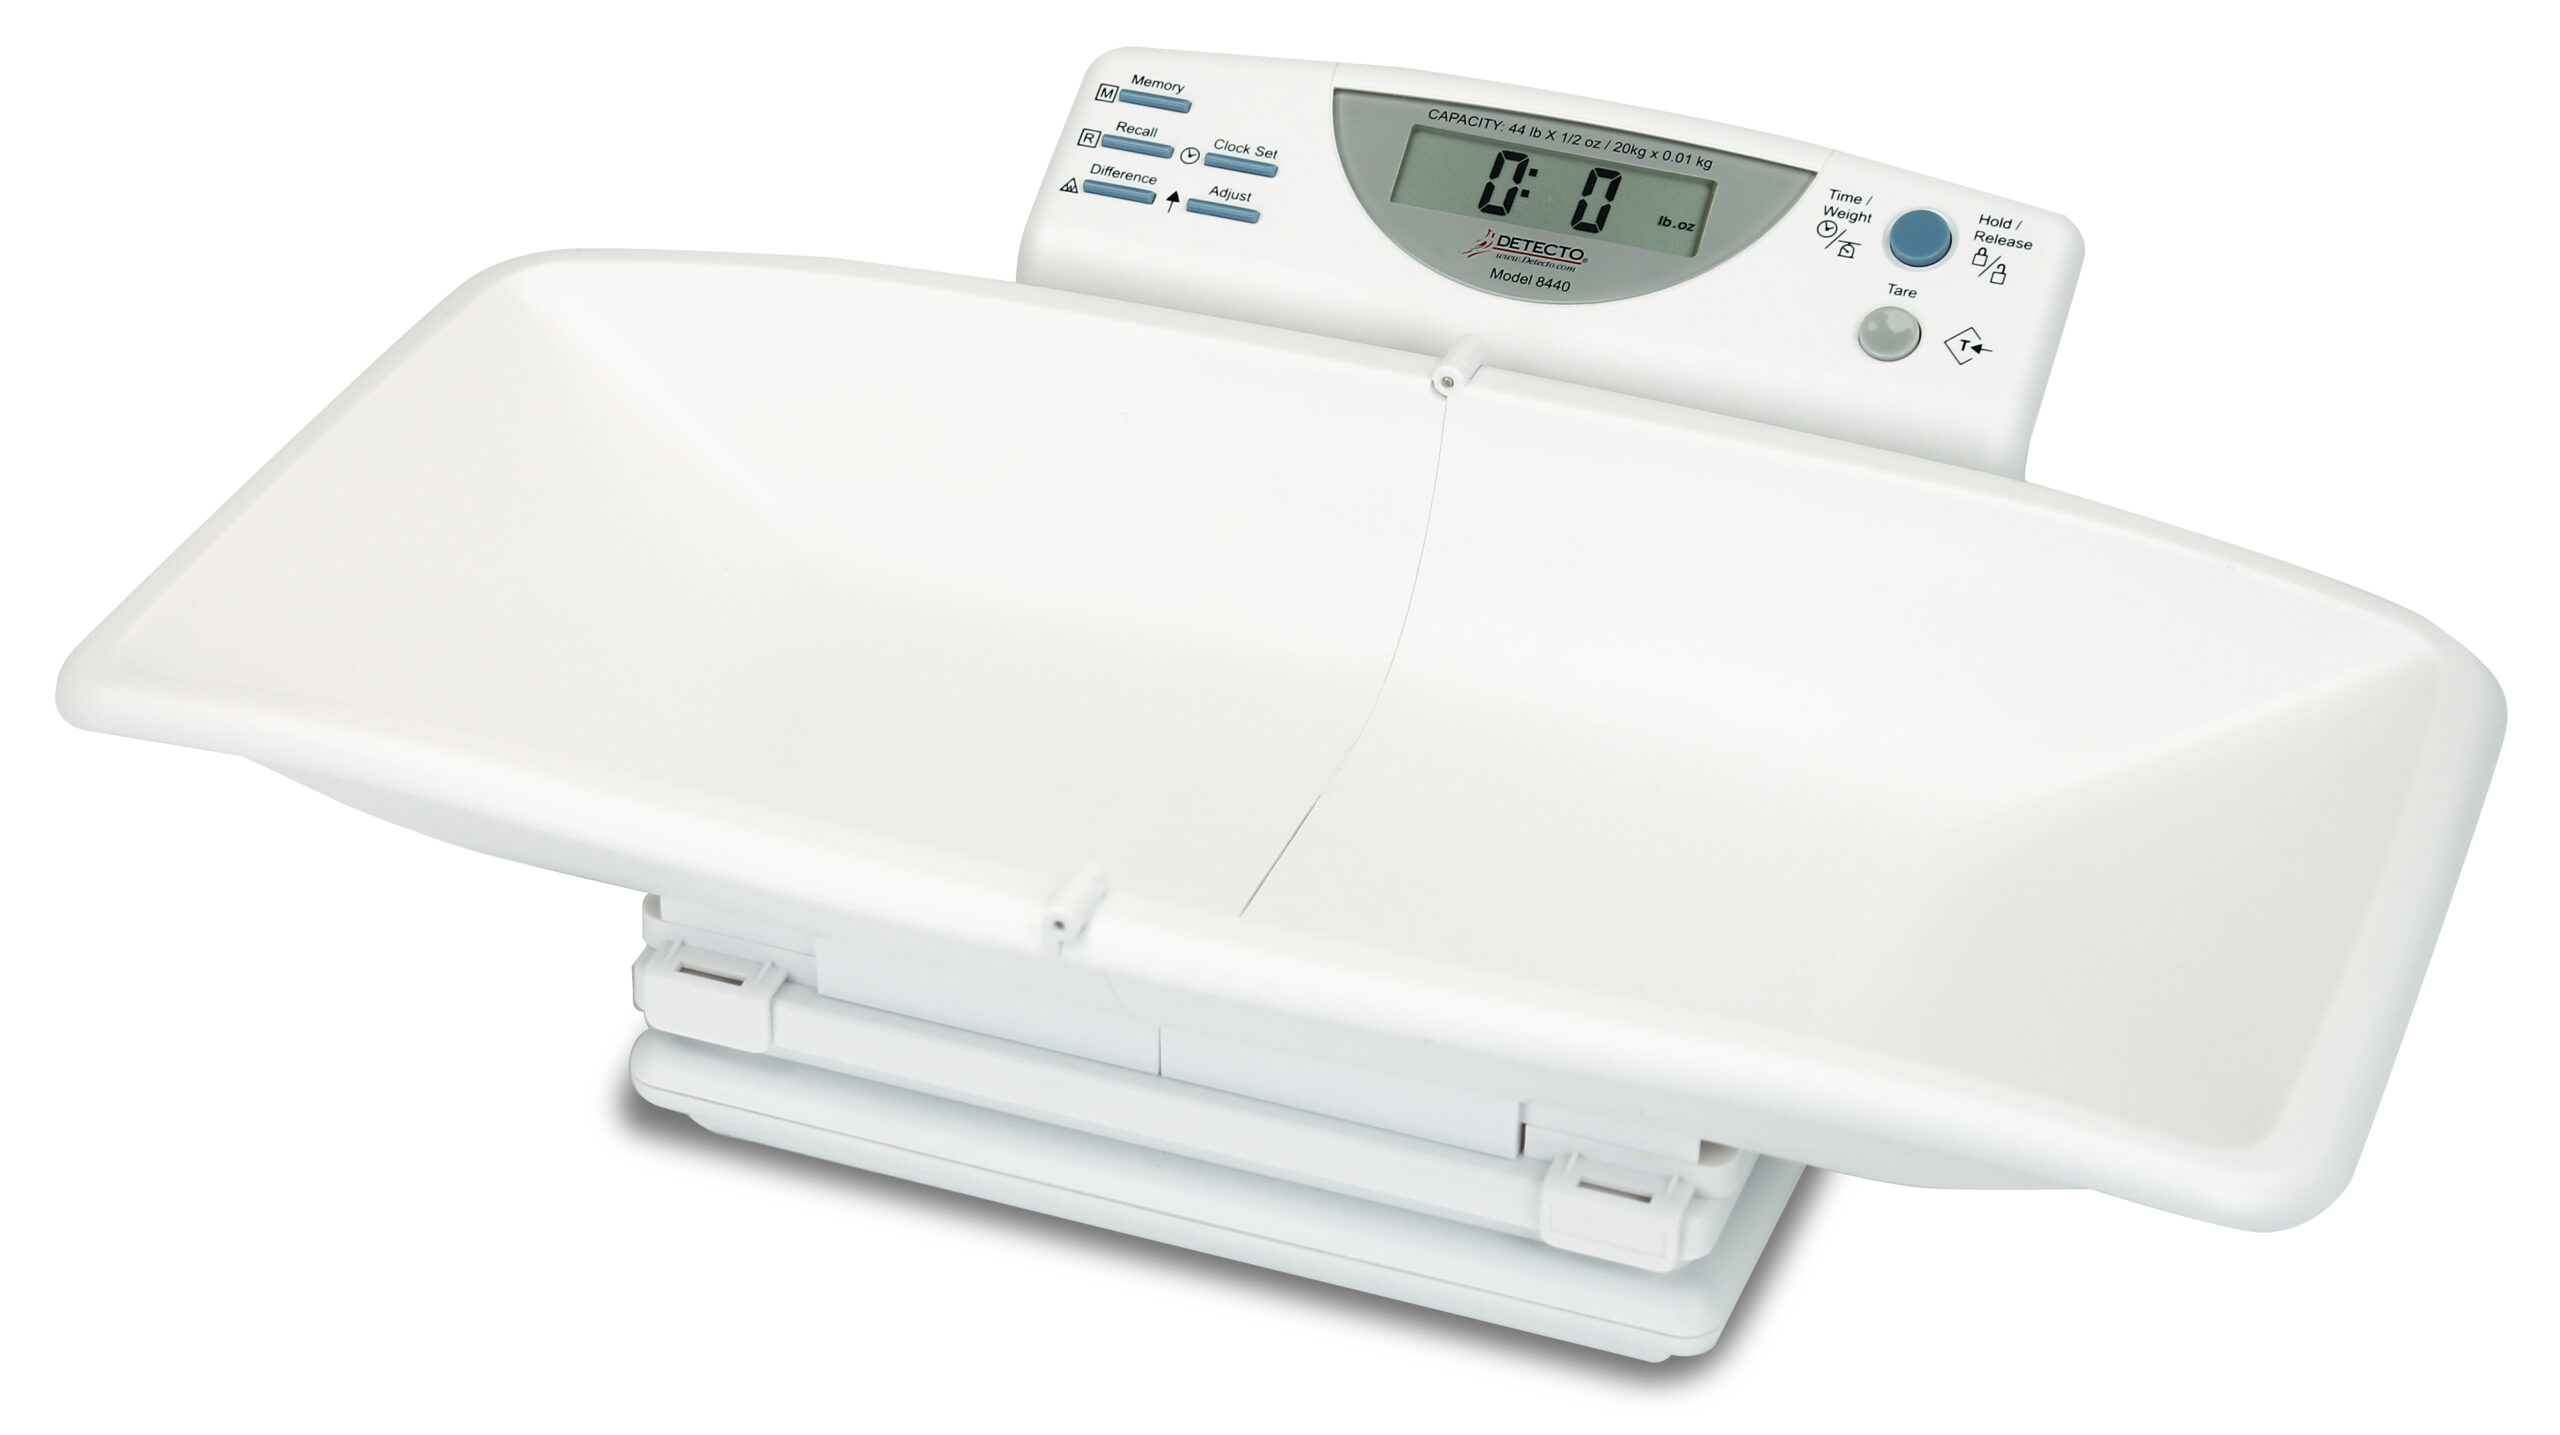 Hopkins Featherweight Baby Scale®